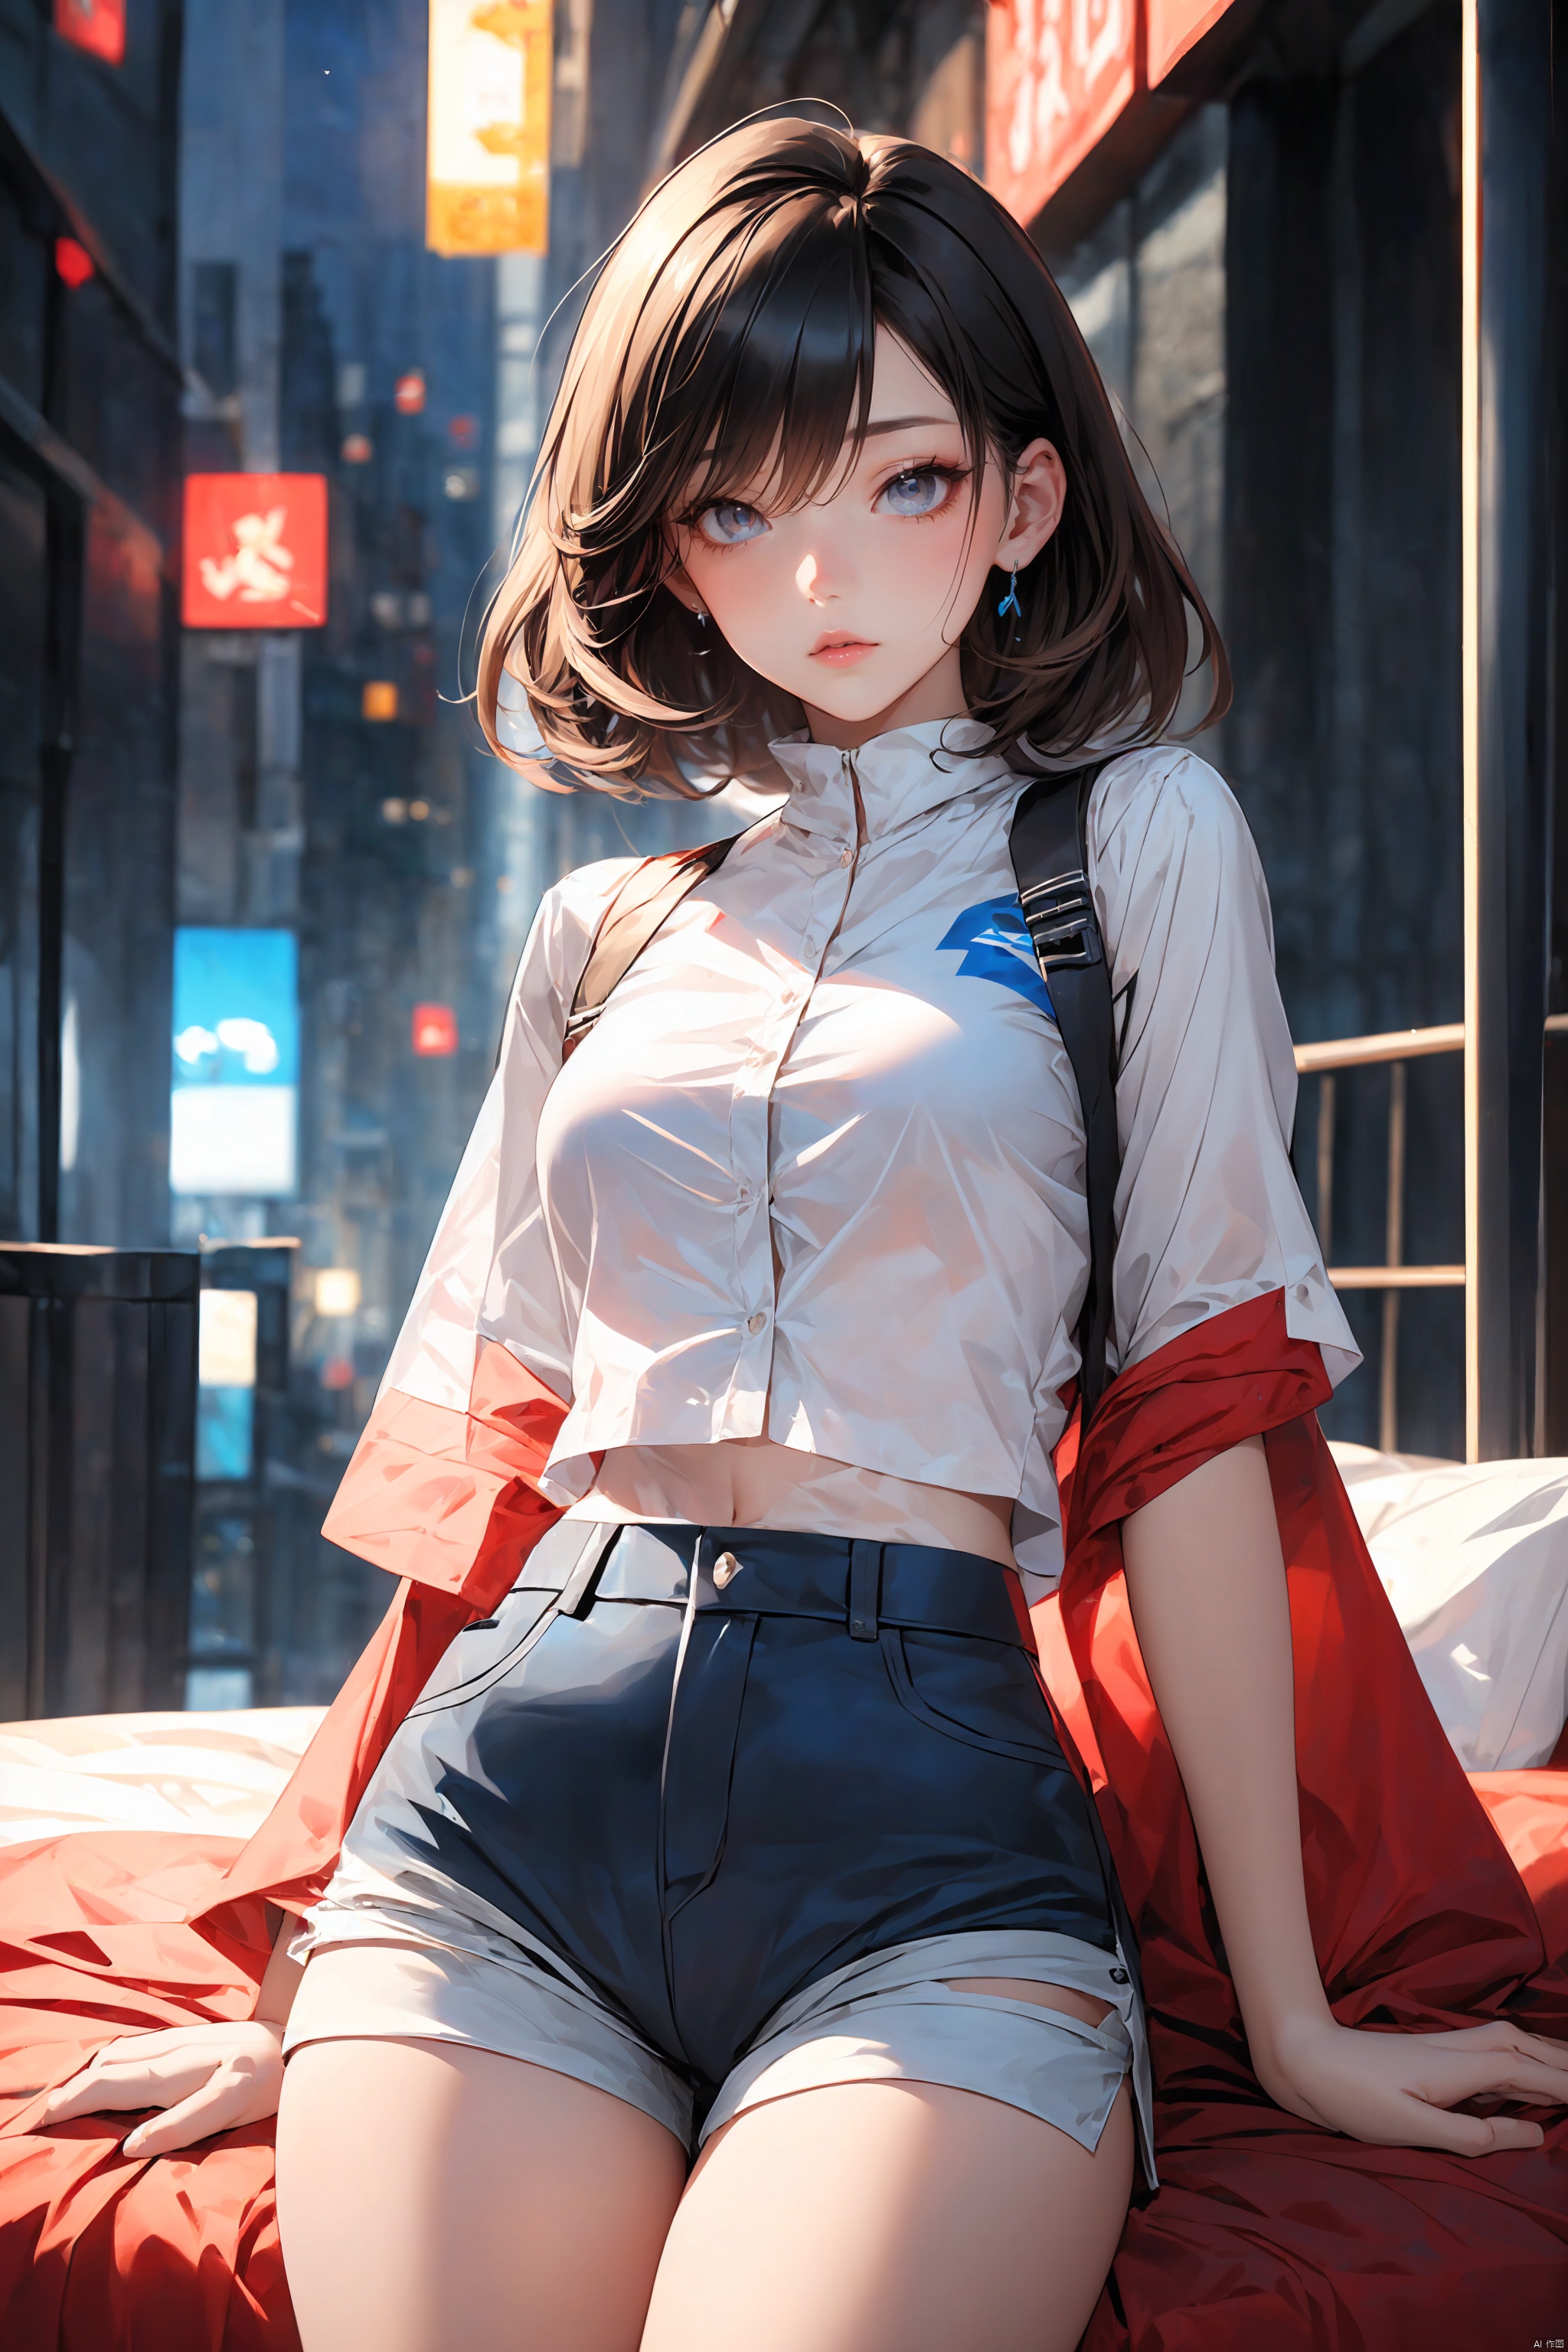  KK-Comic Style, looking at viewer,
bangs,lips, makeup, on bed,
red lips, peach blossom eye, crop_top, 
skirt, night_sky, rooftop, city, 
neon lights, highly detailed, 
ultra-high resolutions, 32K UHD,
best quality, masterpiece,
partiallysubmerged, flower, airbubble, ((poakl))

1girl\((bishoujo), (lovely face:1.4), (reddish black hair:1.4), (browneyes:1.4), (small breast:1.3), (straight_hair:1.4), (short_hair:1.4), plump_*****, long_legs, sharp_eyelid, black eyeliner, black eyelashes, reddish eyeshadow,
(perfect detailed face), (pink lipgloss:1.3), (perfect hands)\),
blue Ultra-thin transparent, (silver Ultra-thin transparent mech:1.3), (all blue color scheme:1.4),  

(short shorts:1.4),